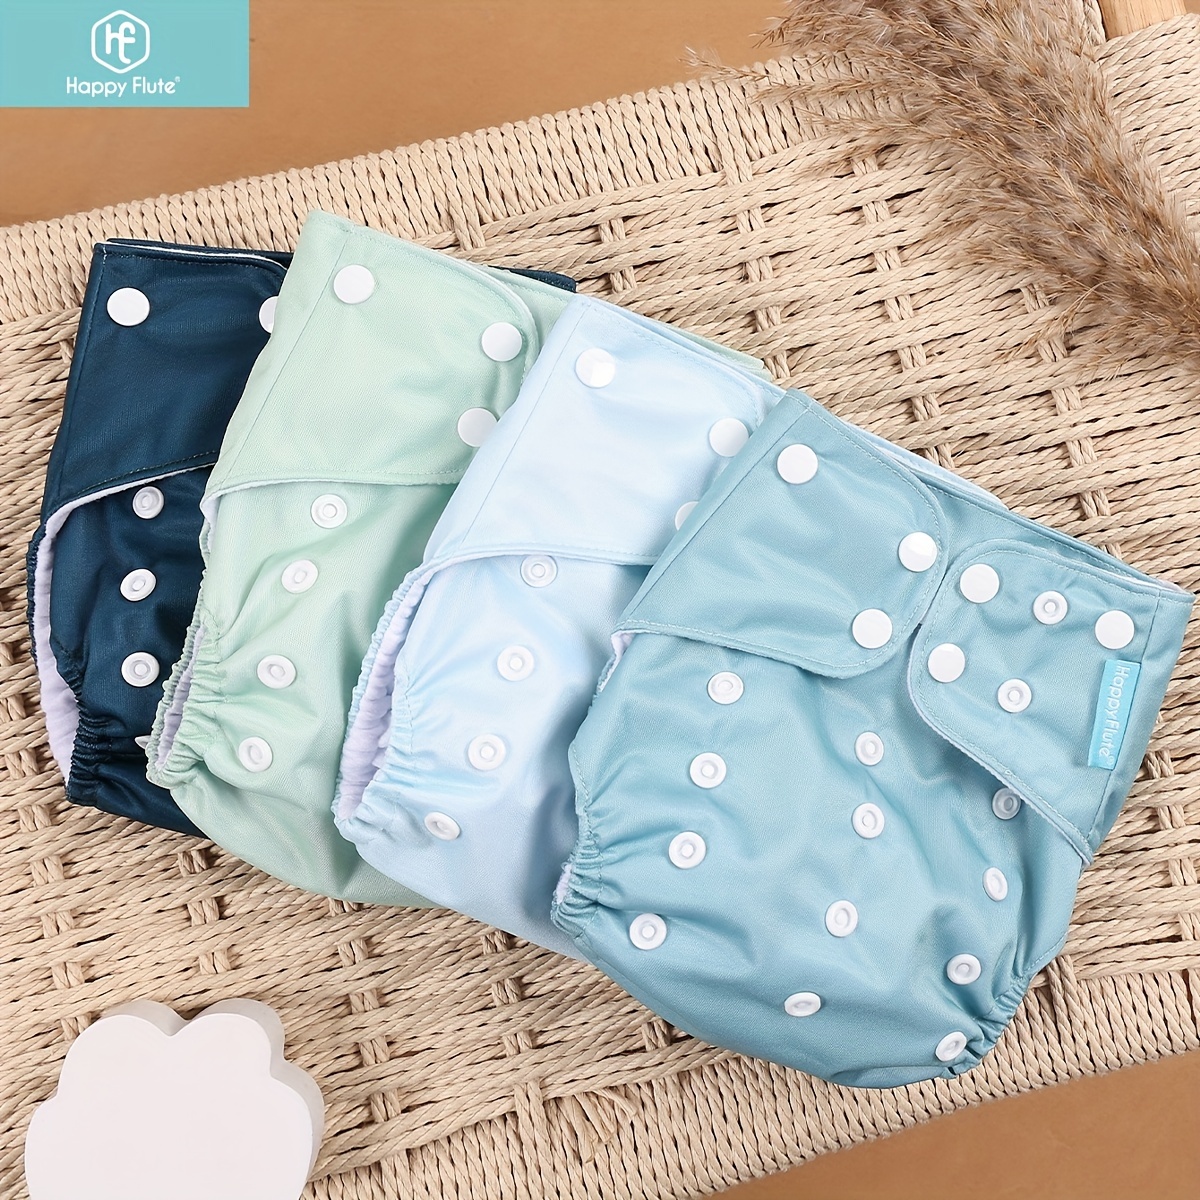 Happy-Flute Washable & Reusable Baby Diaper For Newborn